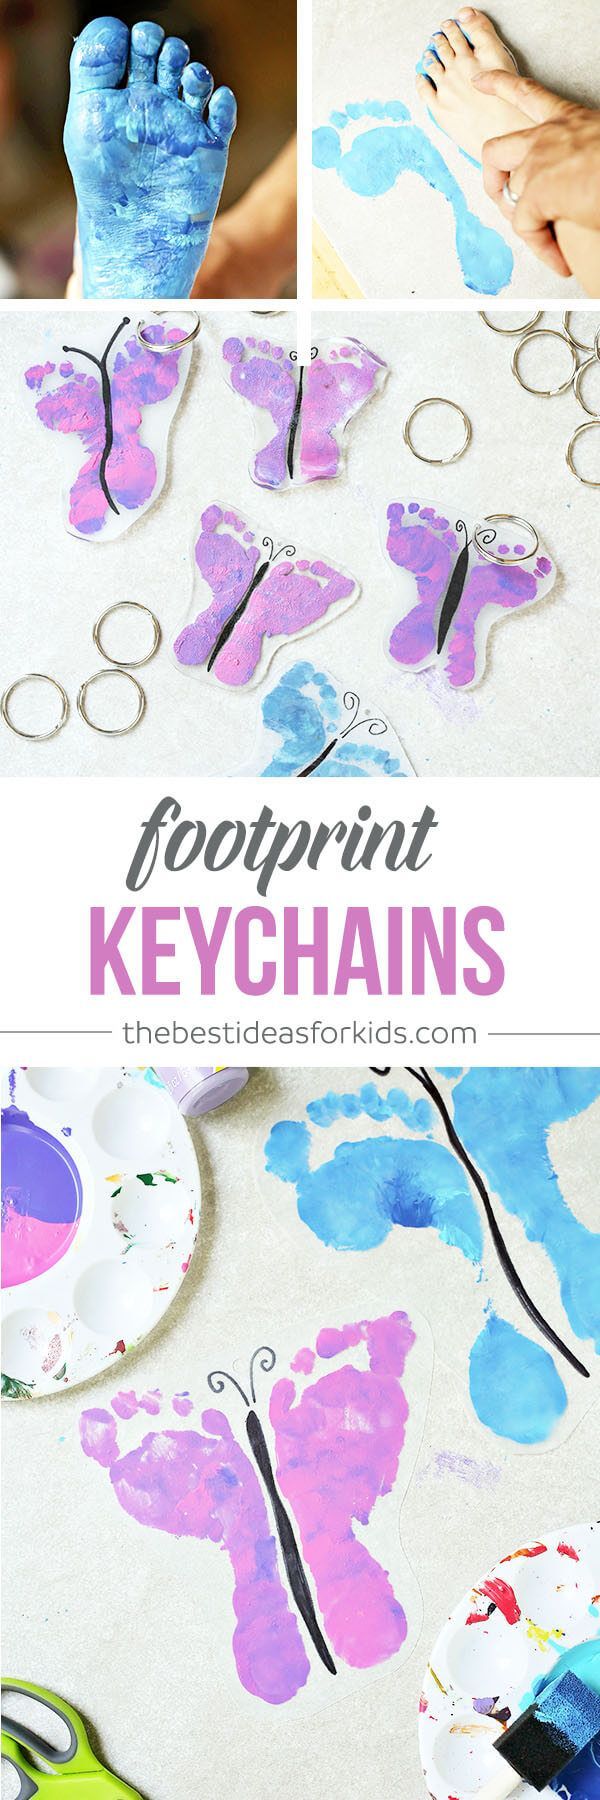 DIY Shrinky Dink Butterfly Footprint Keychains – these are SO CUTE! Perfect for Mothers Day or Fathers Day!  Footprint crafts |